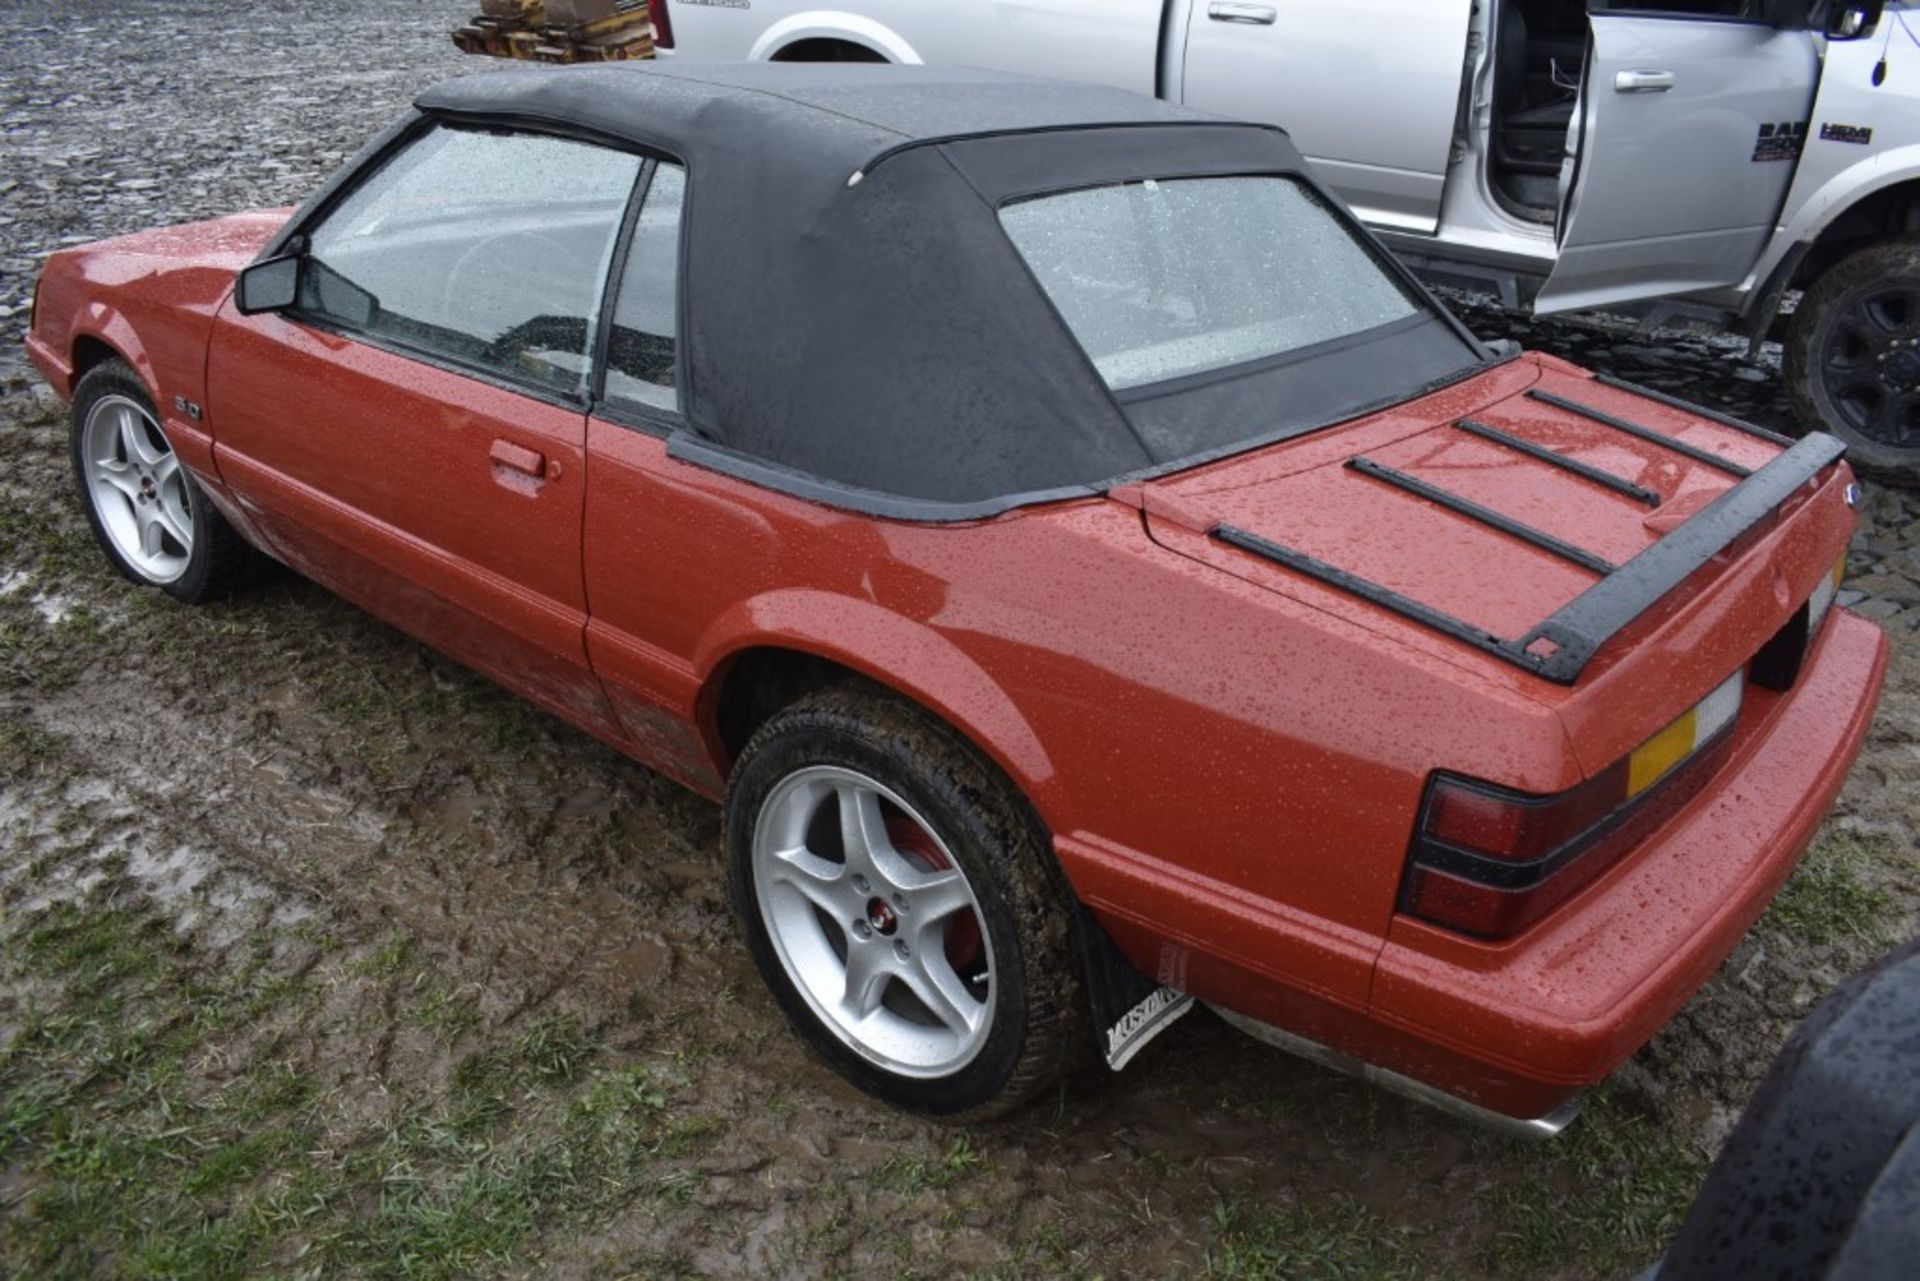 1986 Ford Mustang 5.0 Convertible - Image 7 of 44